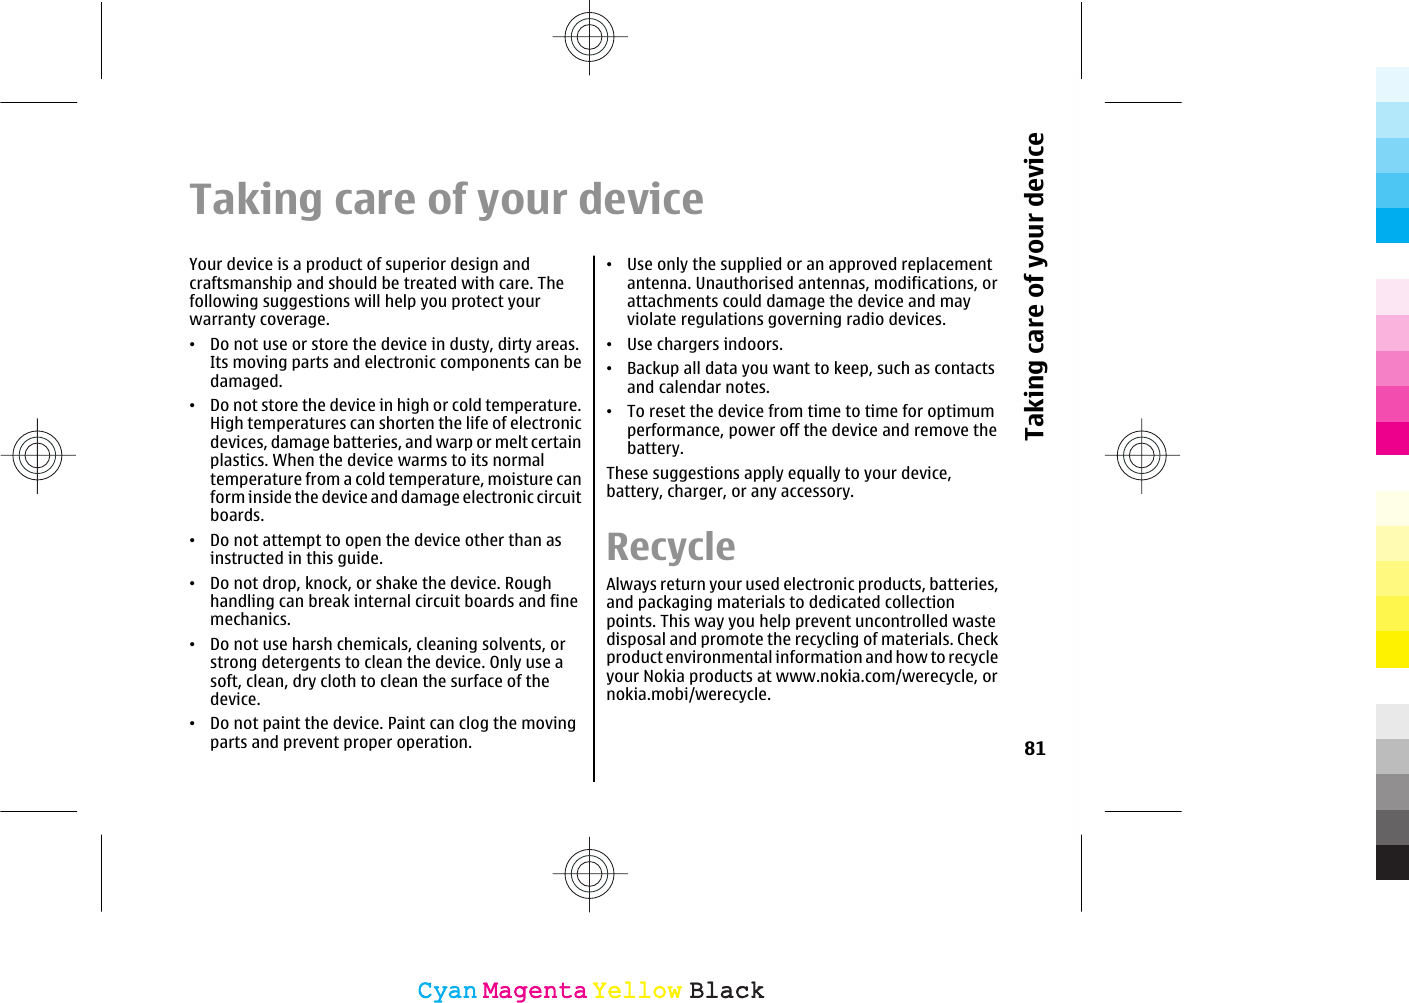 Taking care of your deviceYour device is a product of superior design andcraftsmanship and should be treated with care. Thefollowing suggestions will help you protect yourwarranty coverage.•Do not use or store the device in dusty, dirty areas.Its moving parts and electronic components can bedamaged.•Do not store the device in high or cold temperature.High temperatures can shorten the life of electronicdevices, damage batteries, and warp or melt certainplastics. When the device warms to its normaltemperature from a cold temperature, moisture canform inside the device and damage electronic circuitboards.•Do not attempt to open the device other than asinstructed in this guide.•Do not drop, knock, or shake the device. Roughhandling can break internal circuit boards and finemechanics.•Do not use harsh chemicals, cleaning solvents, orstrong detergents to clean the device. Only use asoft, clean, dry cloth to clean the surface of thedevice.•Do not paint the device. Paint can clog the movingparts and prevent proper operation.•Use only the supplied or an approved replacementantenna. Unauthorised antennas, modifications, orattachments could damage the device and mayviolate regulations governing radio devices.•Use chargers indoors.•Backup all data you want to keep, such as contactsand calendar notes.•To reset the device from time to time for optimumperformance, power off the device and remove thebattery.These suggestions apply equally to your device,battery, charger, or any accessory.RecycleAlways return your used electronic products, batteries,and packaging materials to dedicated collectionpoints. This way you help prevent uncontrolled wastedisposal and promote the recycling of materials. Checkproduct environmental information and how to recycleyour Nokia products at www.nokia.com/werecycle, ornokia.mobi/werecycle.81Taking care of your deviceCyanCyanMagentaMagentaYellowYellowBlackBlack